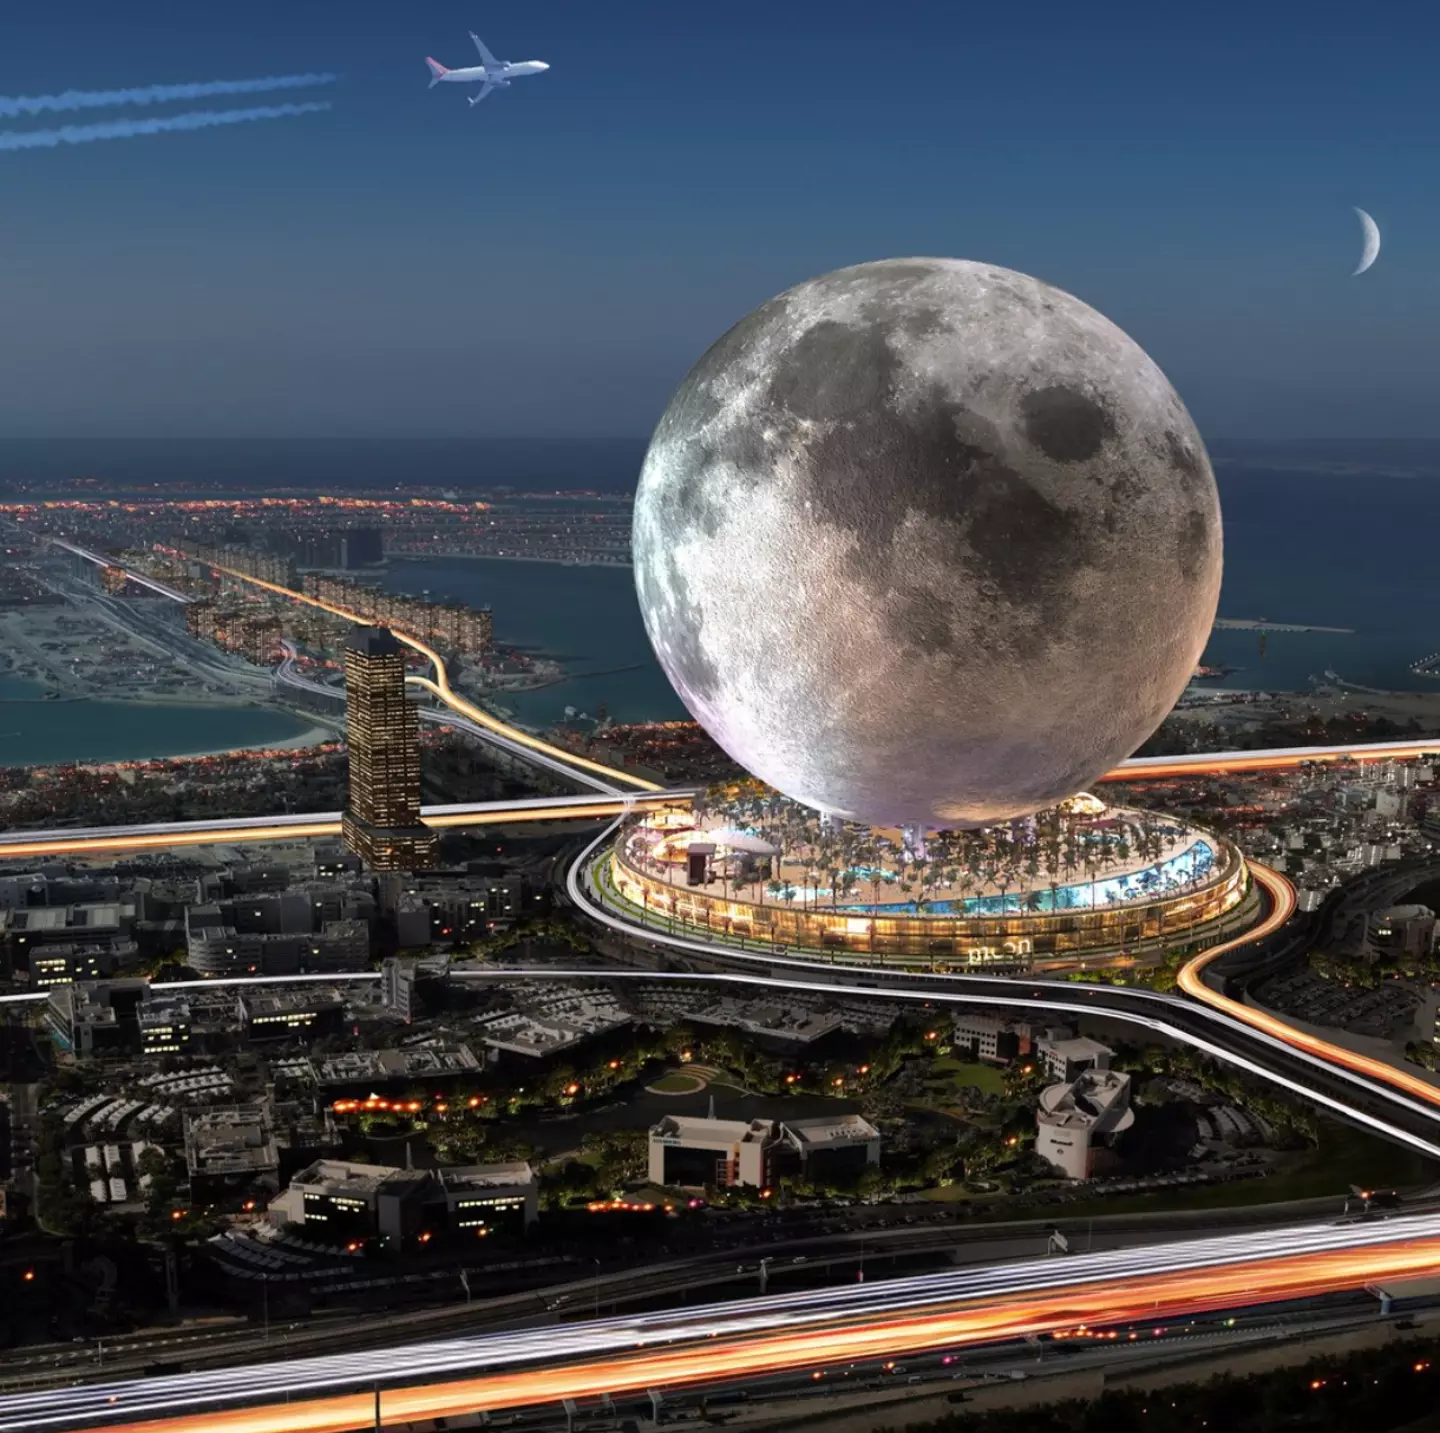 MOON Dubai s set to feature a gigantic 274m replica of the moon.